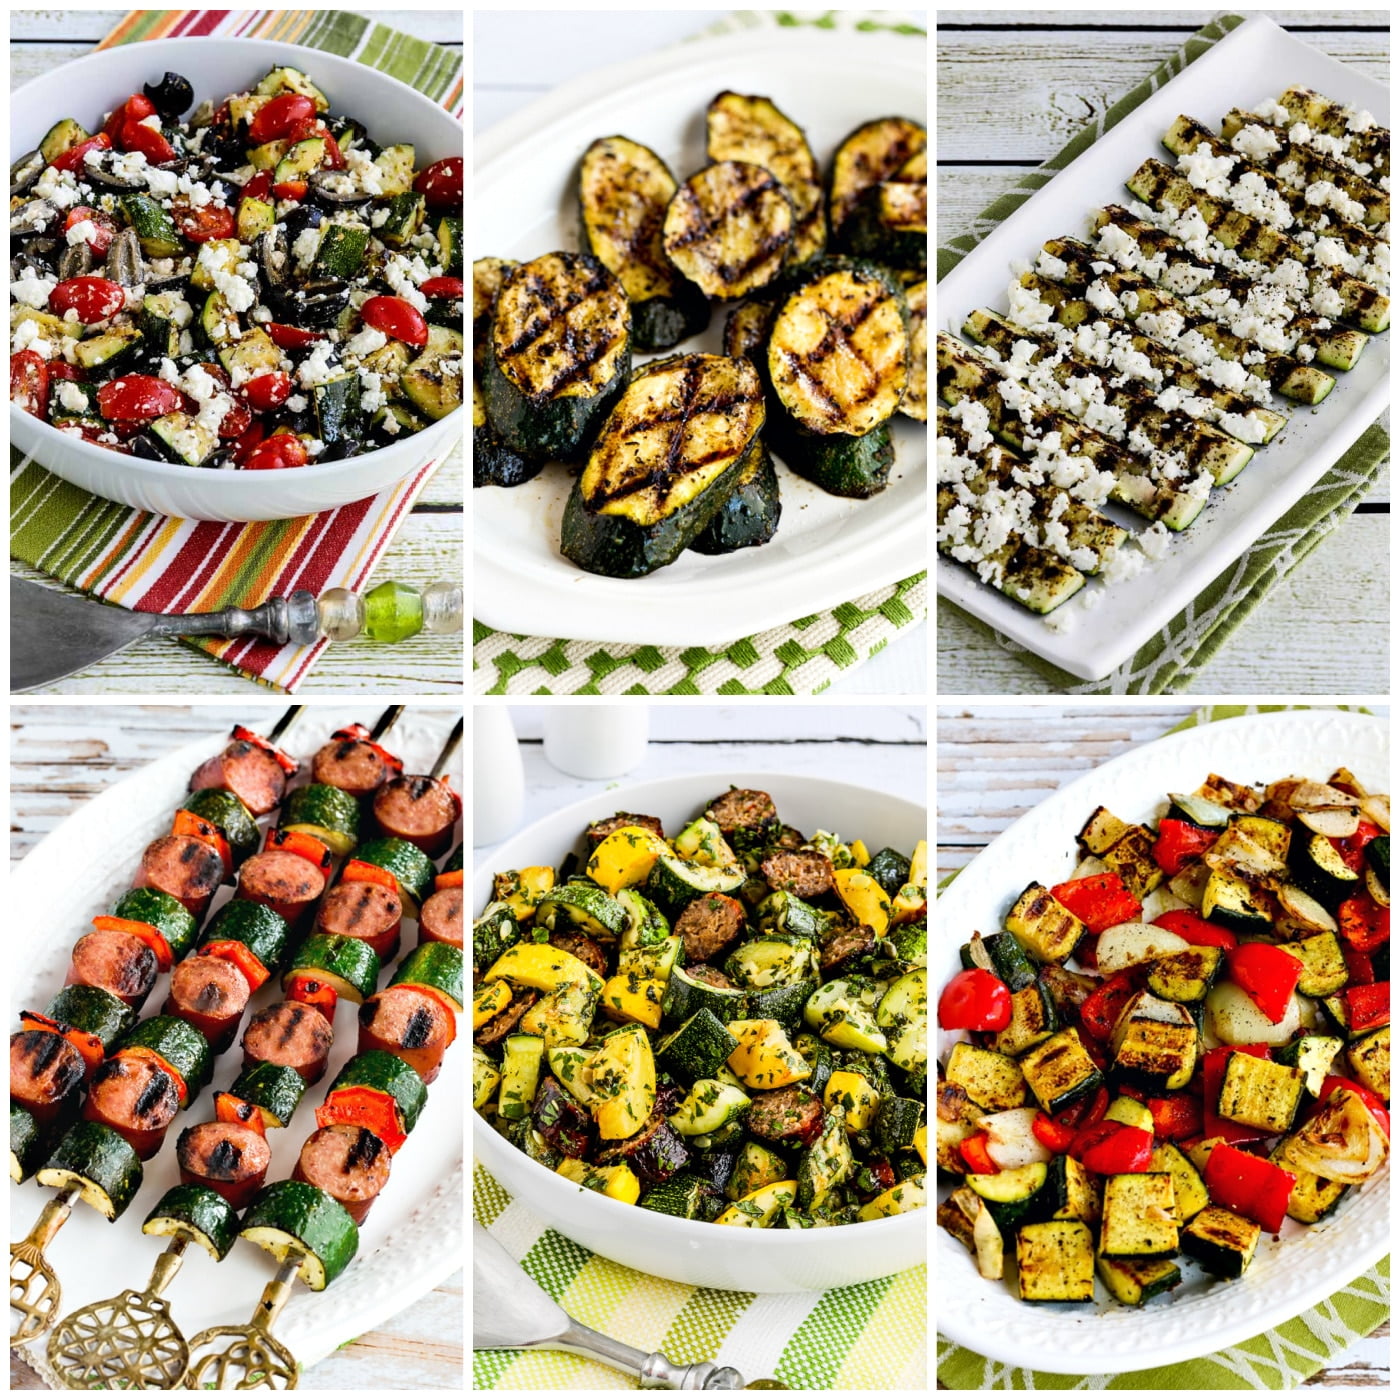 1625927420 Low Carb And Keto Grilled Zucchini Recipes – Kalyns Kitchen 